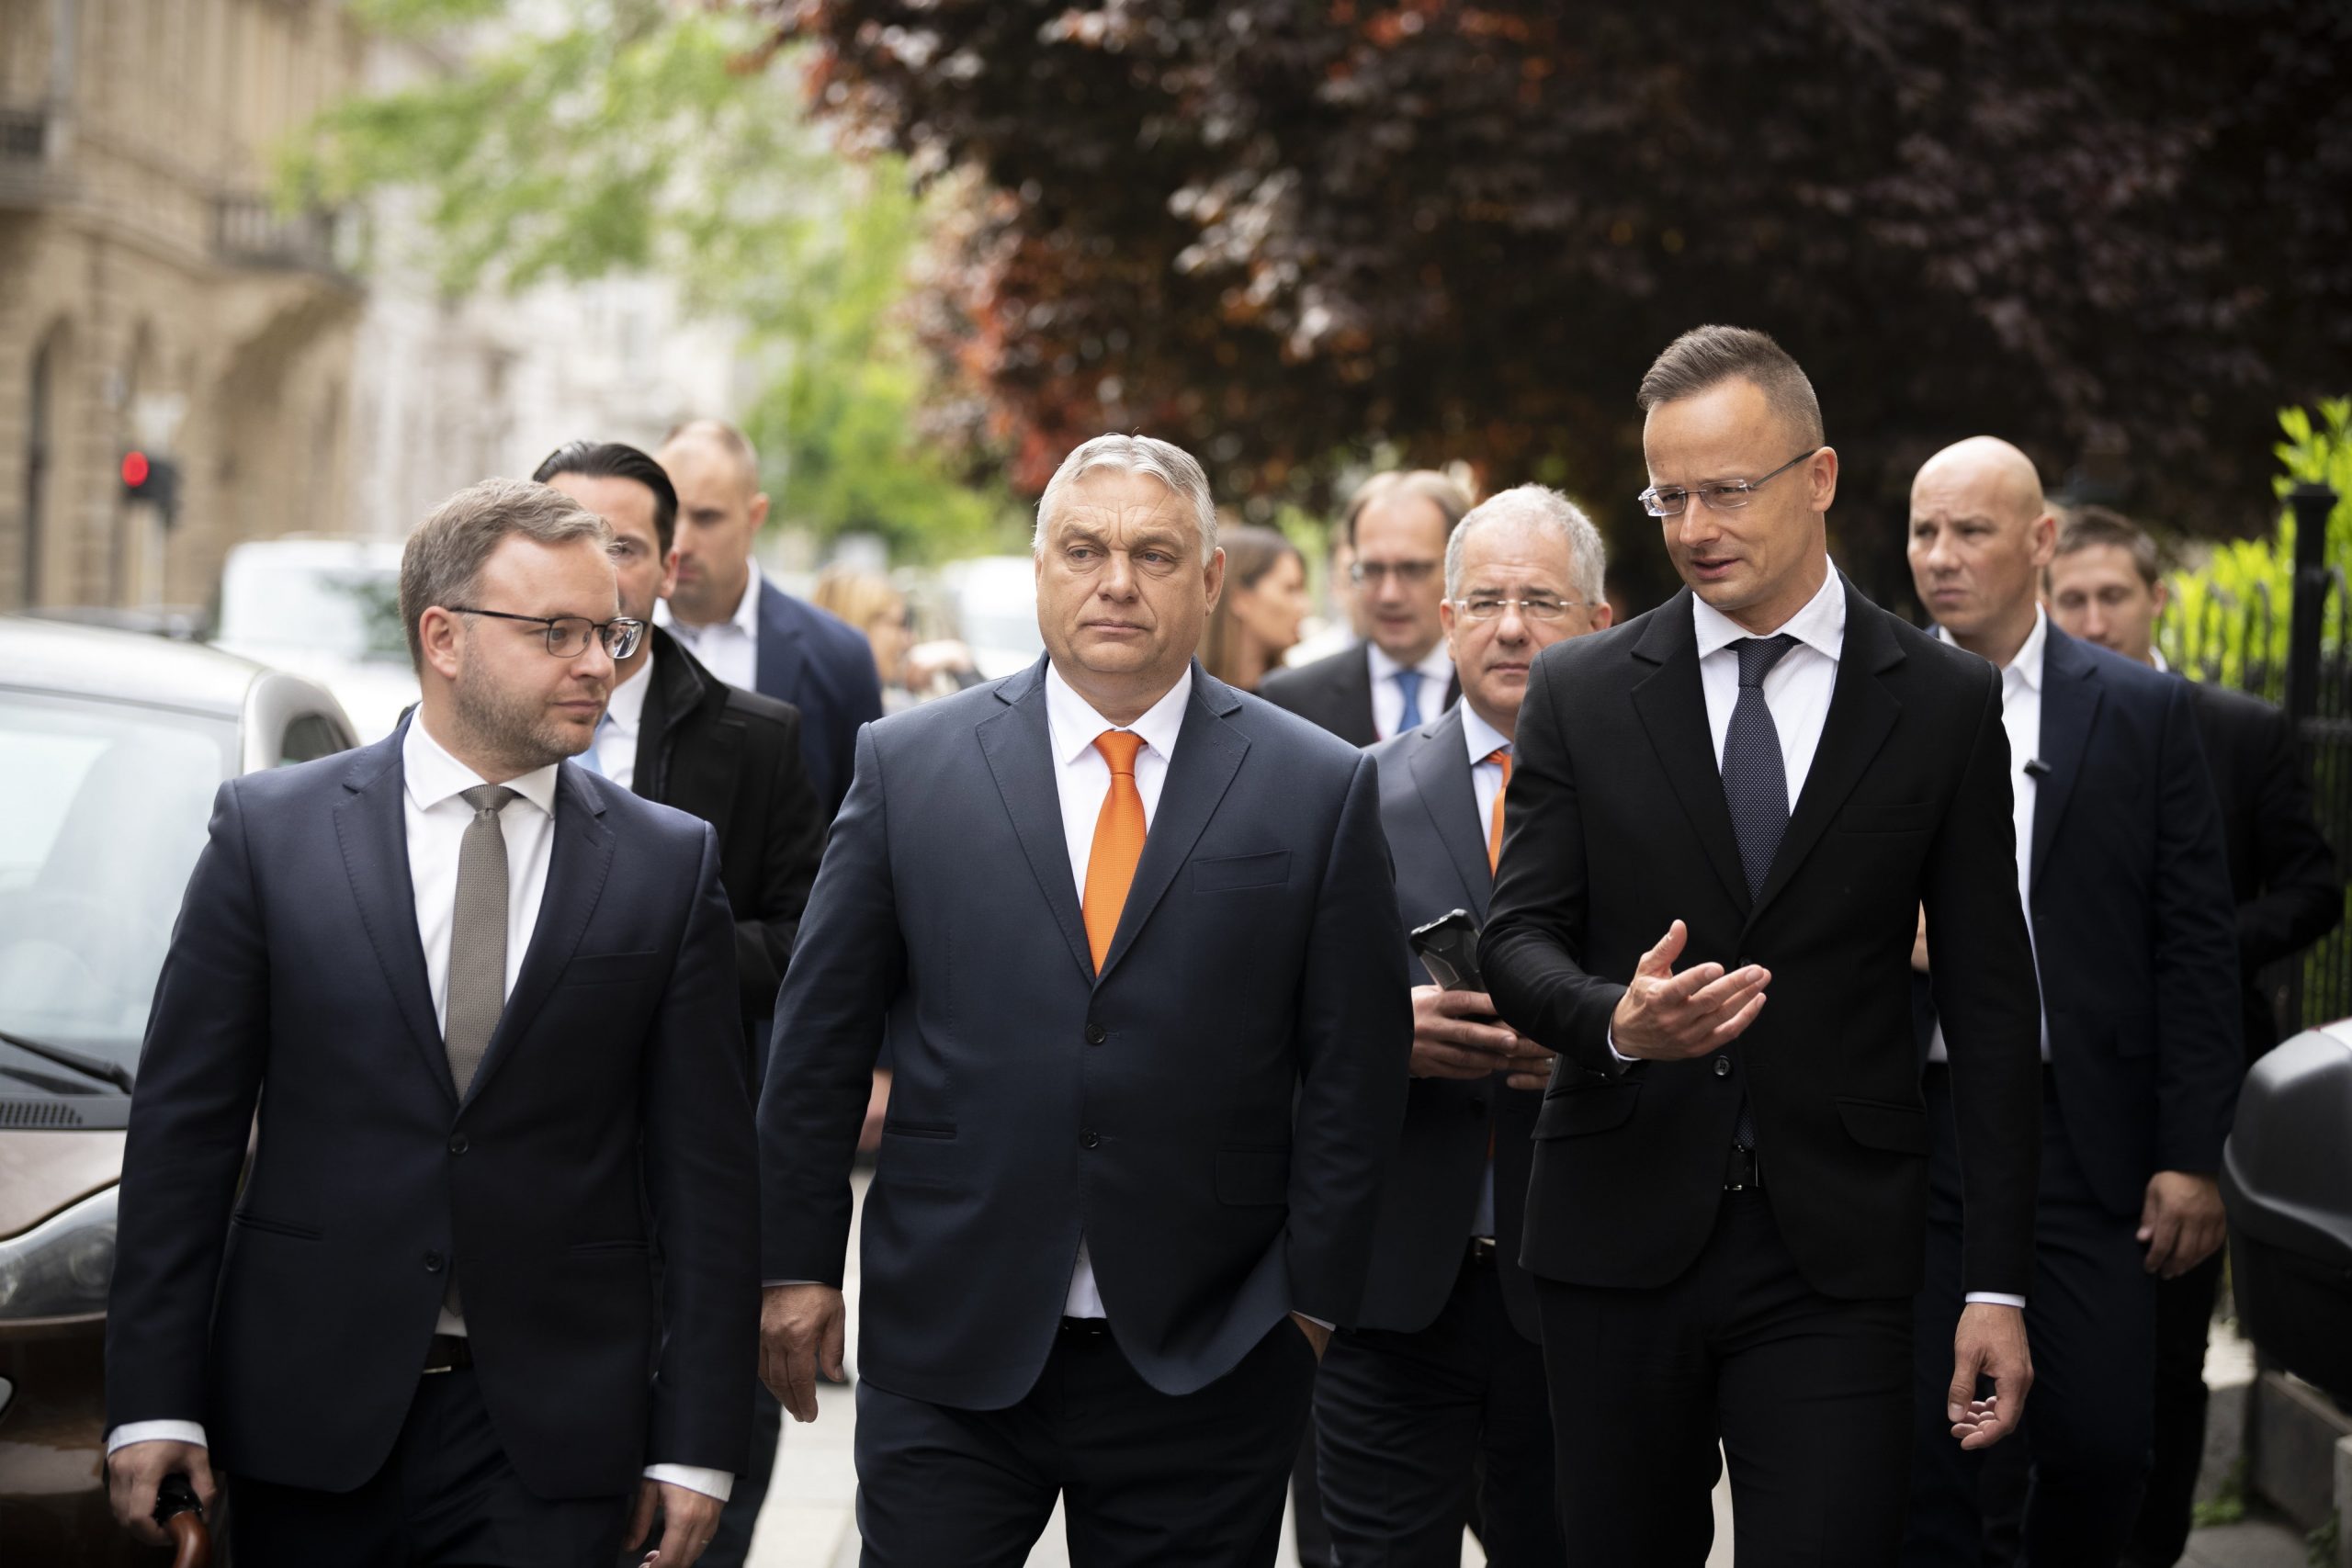 Unofficial List of Fifth Orbán Government Published